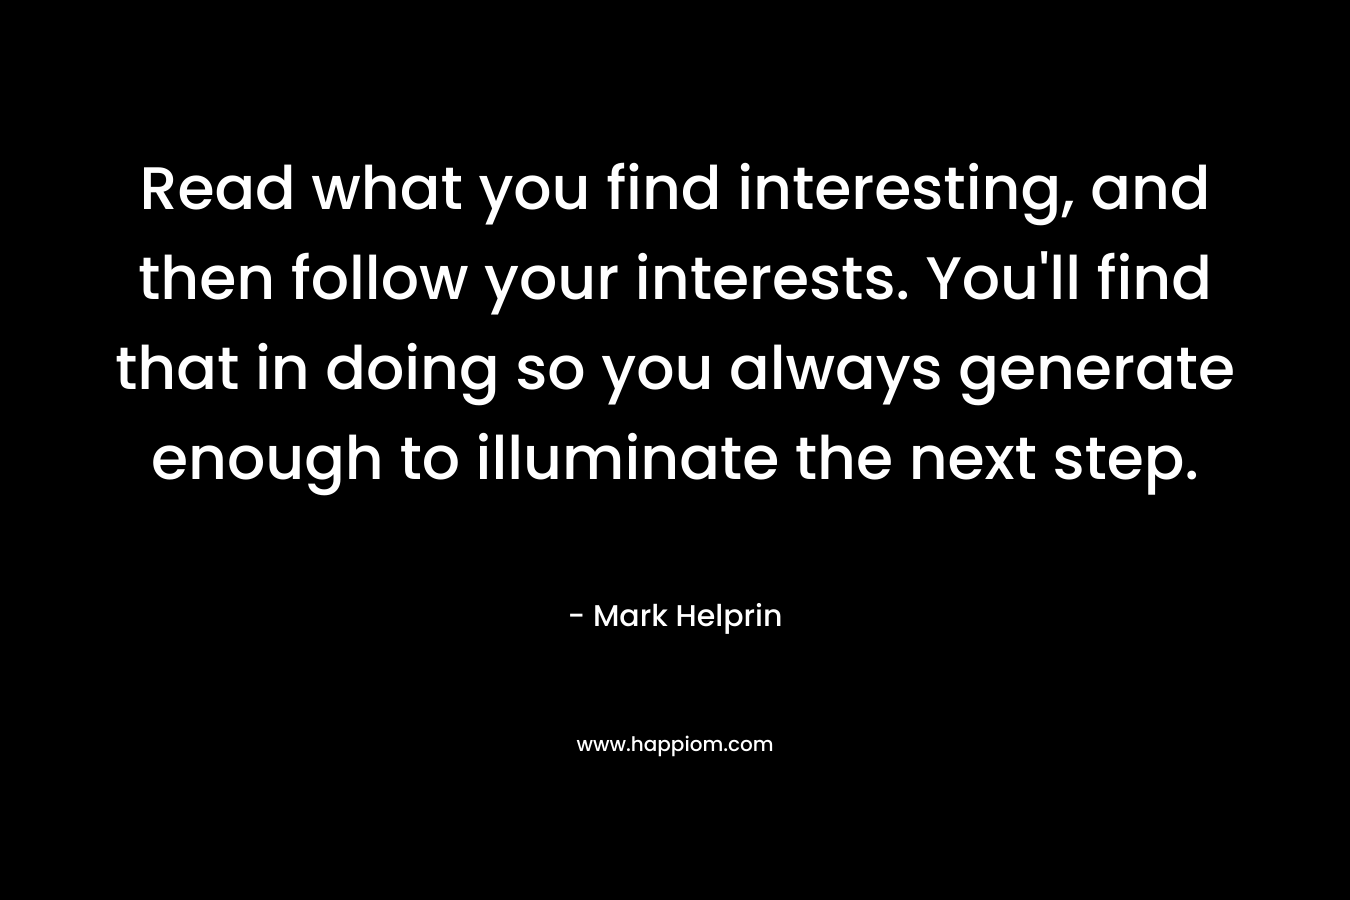 Read what you find interesting, and then follow your interests. You'll find that in doing so you always generate enough to illuminate the next step.